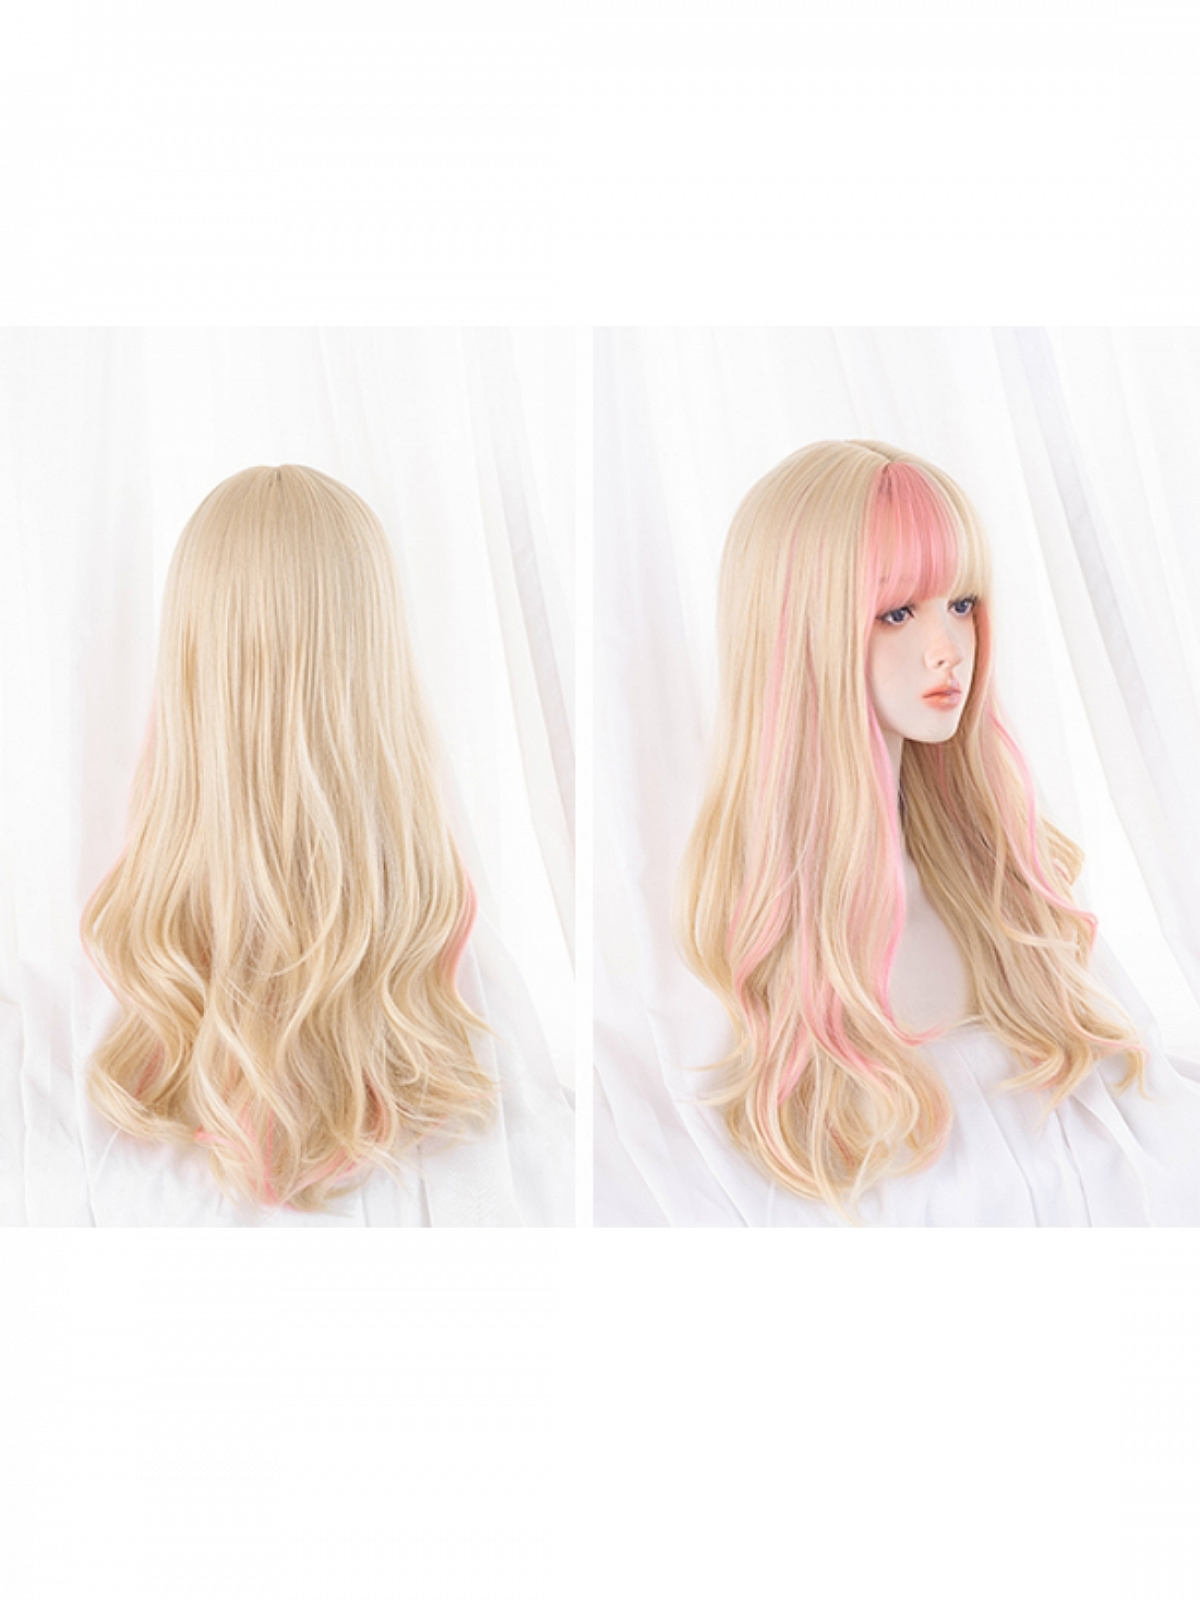 2021 New Style Blonde And Pink Mixed Color Long Wavy Synthetic Wig With Bangs